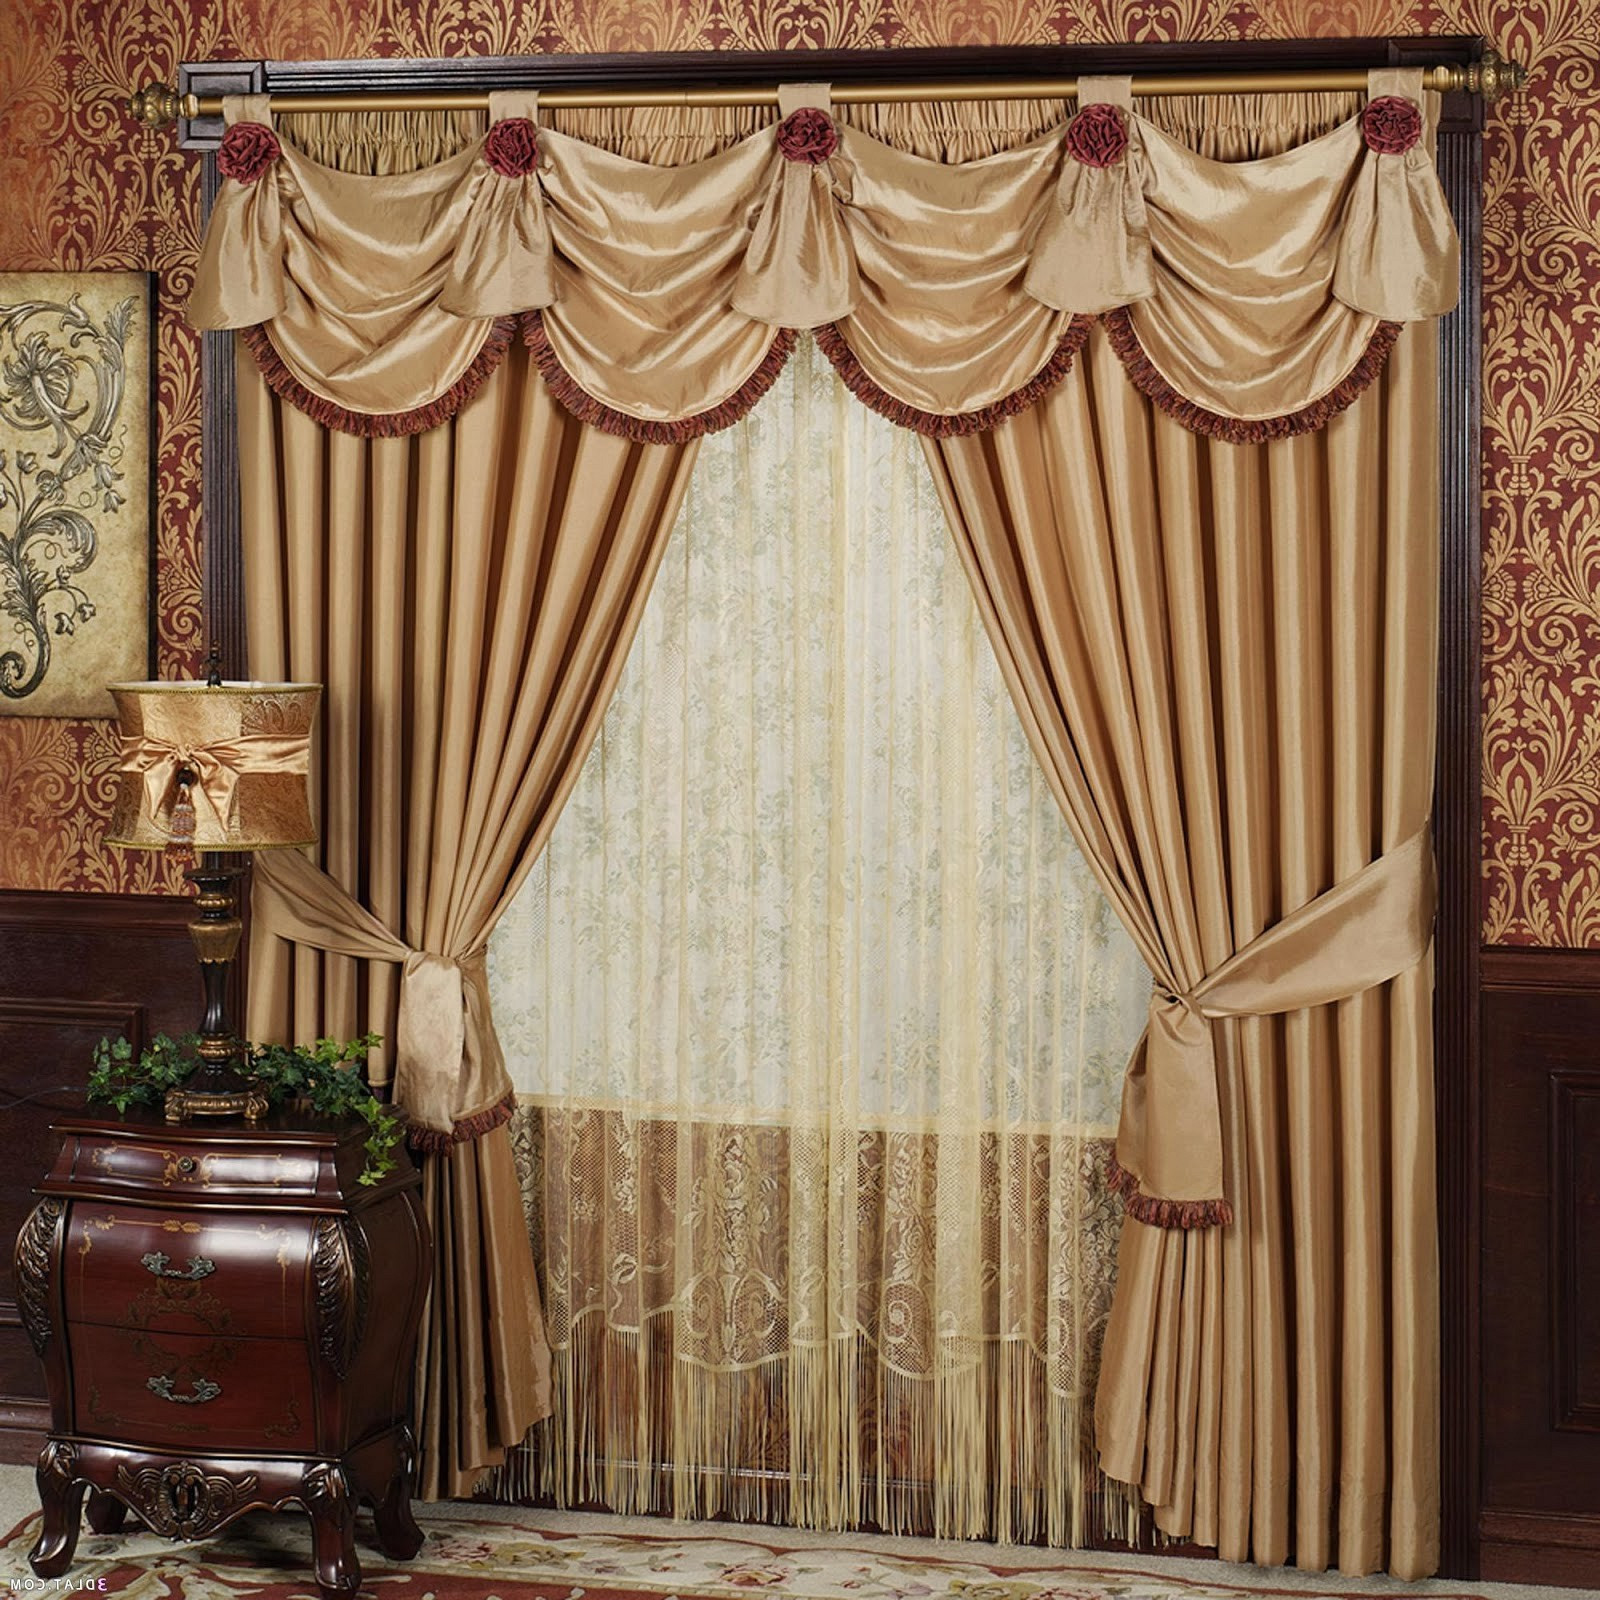 Elegant Curtain For Living Room
 Living Room Curtains Designs Excellent Intended Window